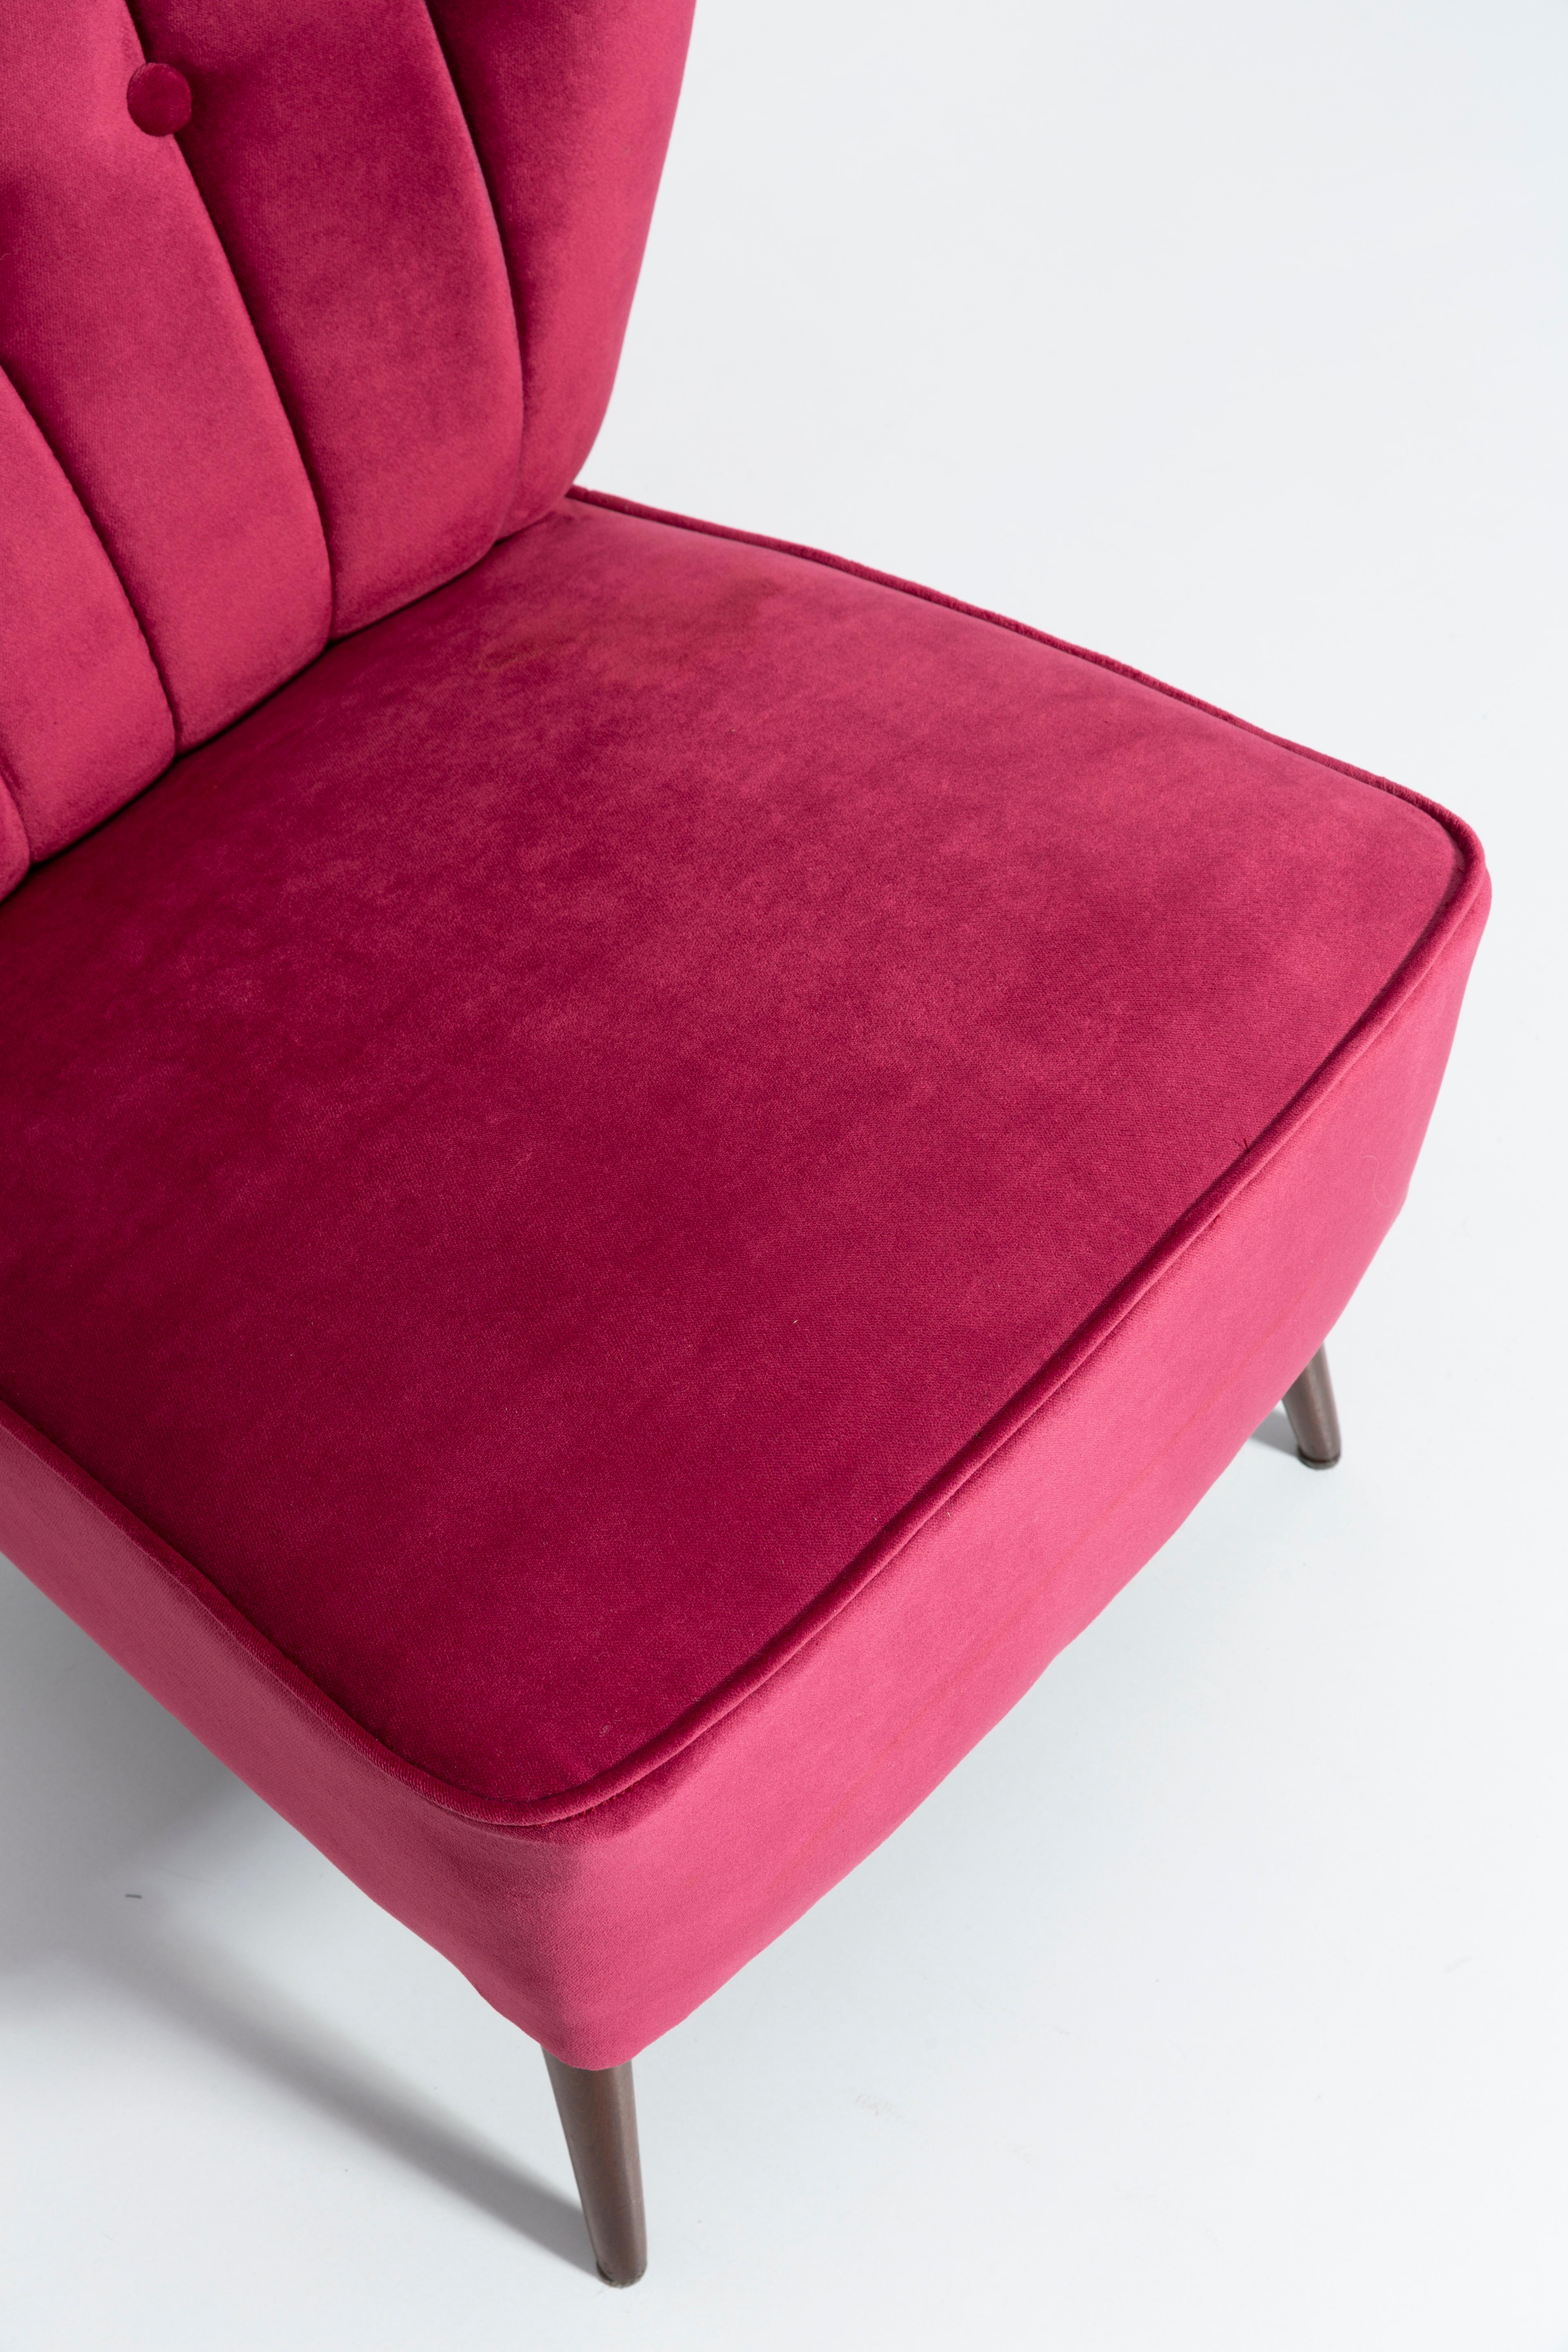 Set of Two Midcentury Magenta Pink Velvet Club Armchairs, Europe, 1960s For Sale 2